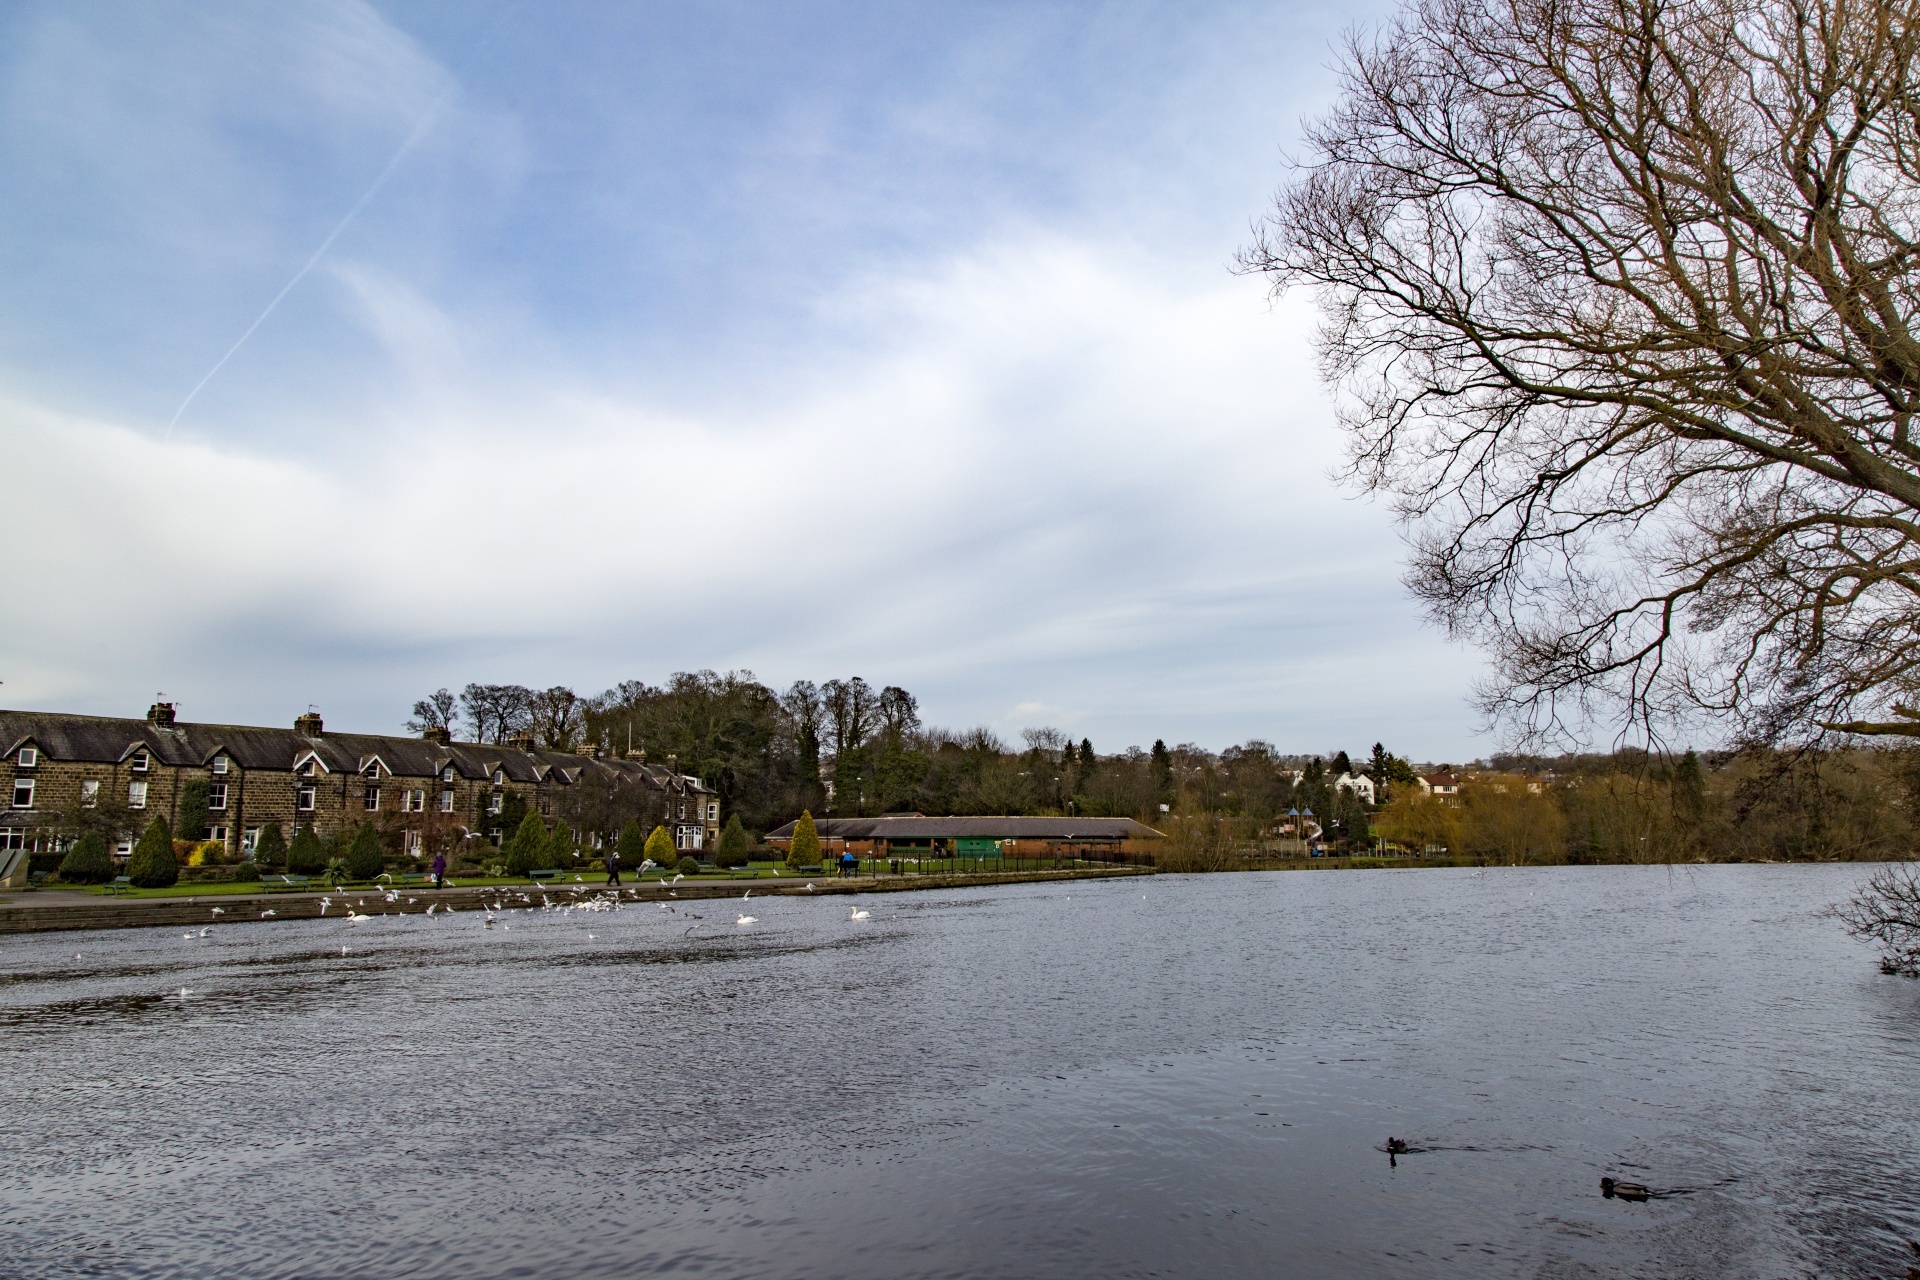 River Wharfe In Otley, Otley is a market town and civil parish at a bridging point on the River Wharfe in the City of Leeds metropolitan borough in West Yorkshire,